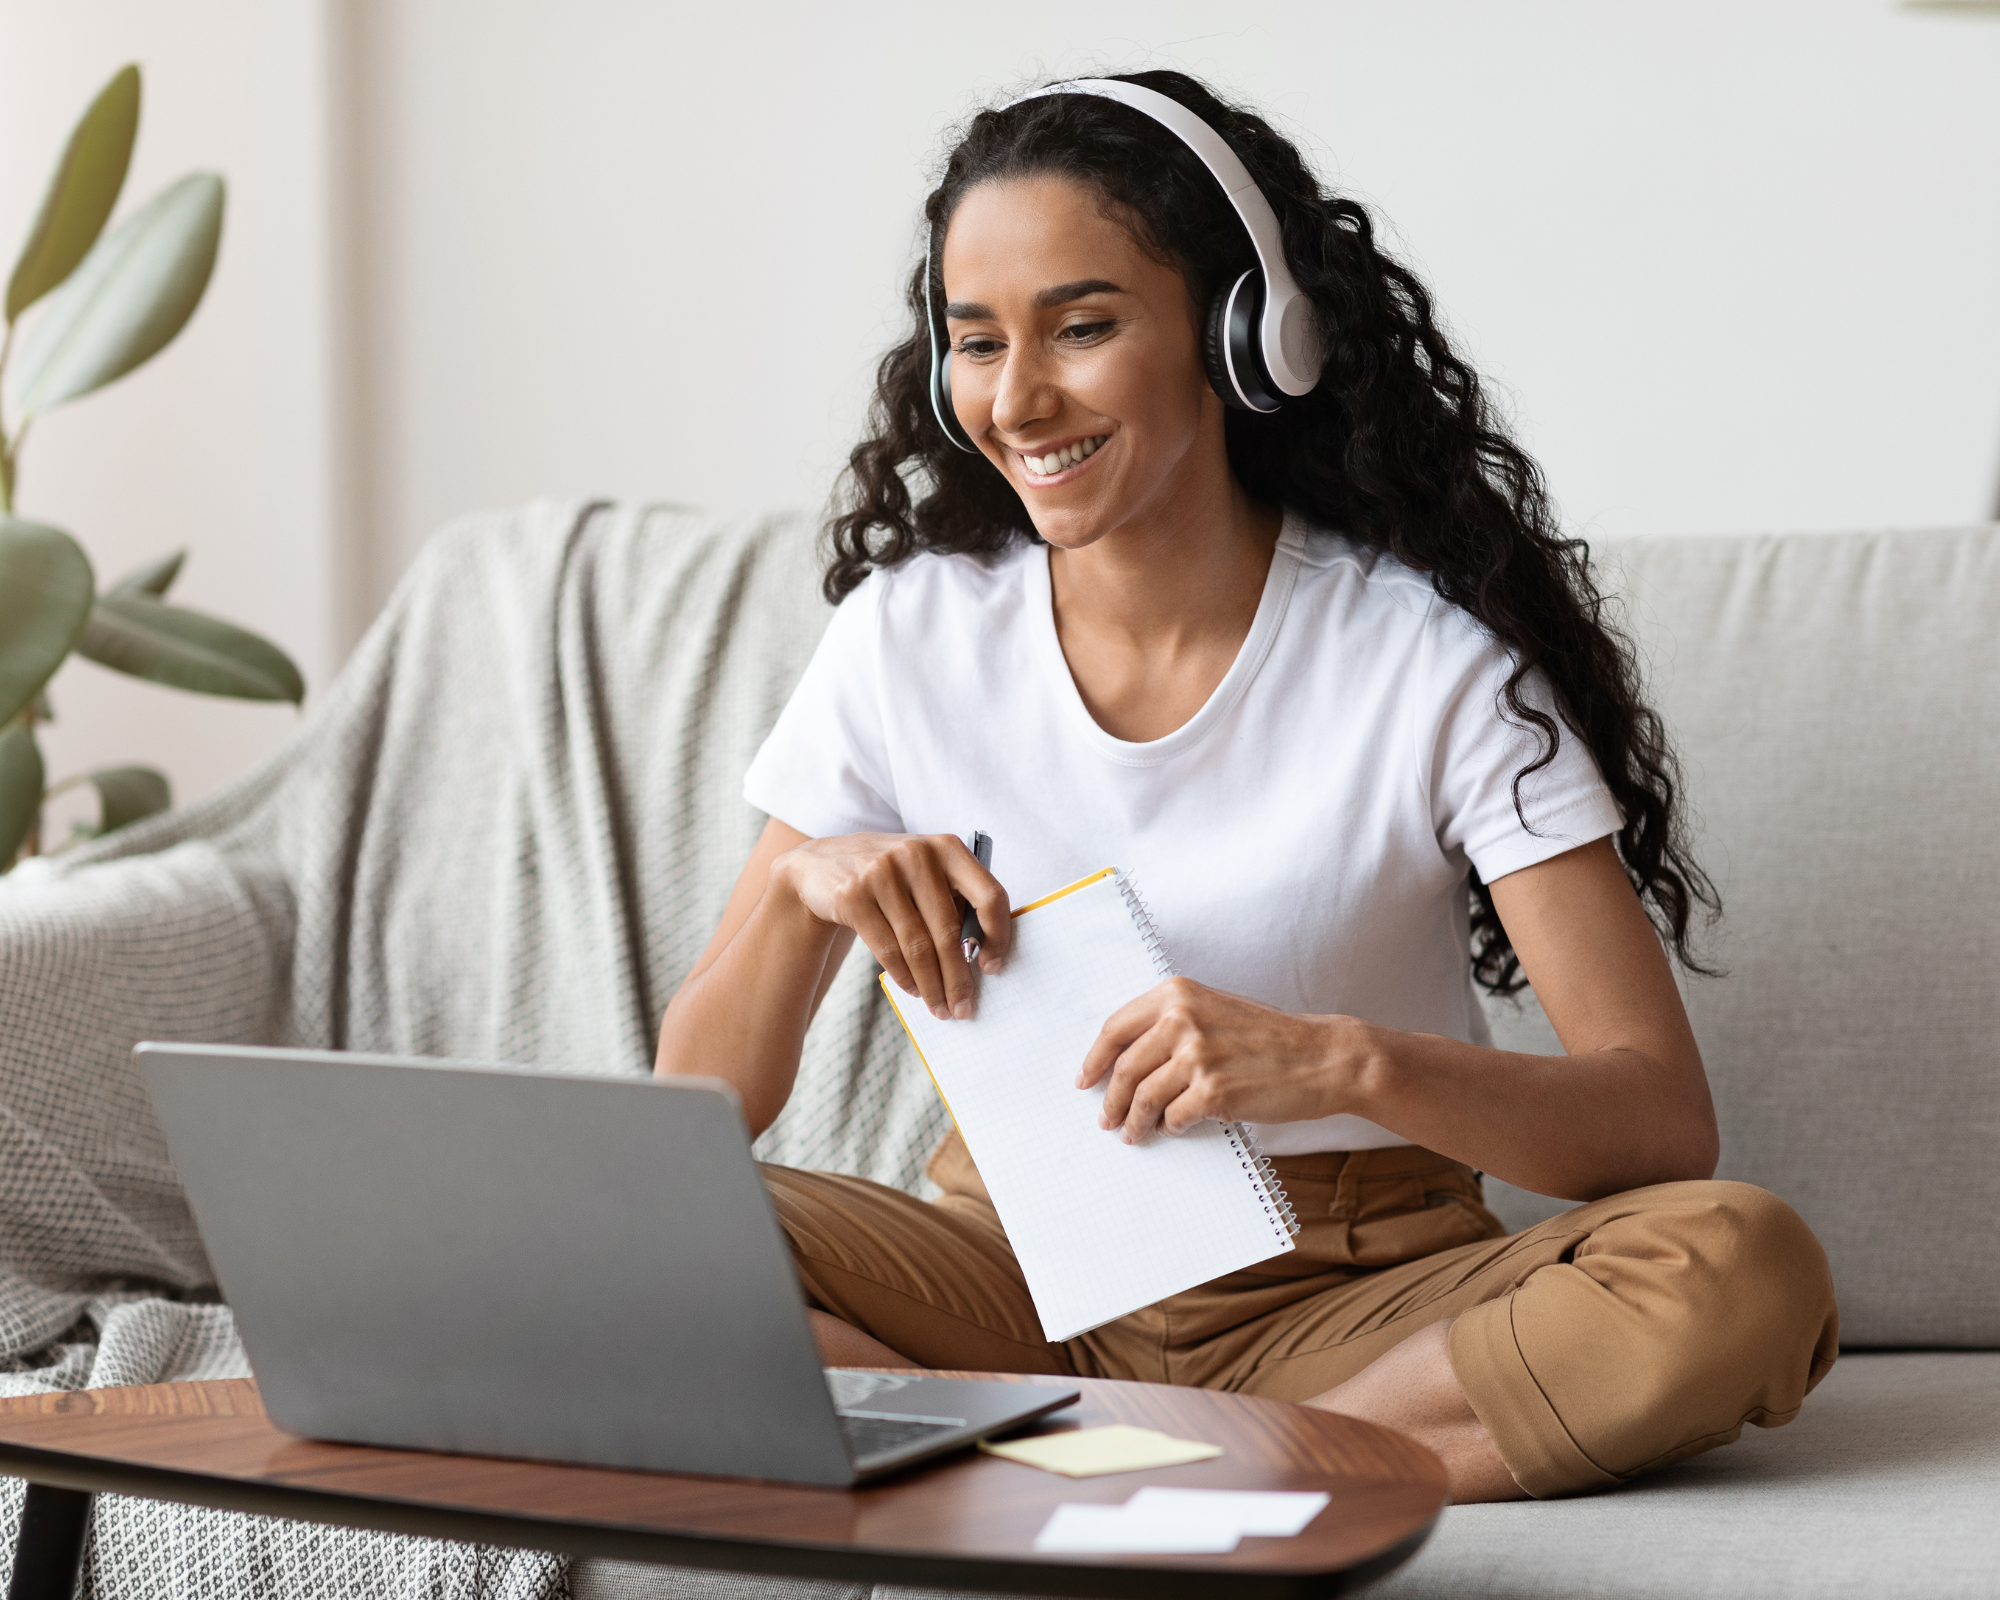 Woman with headphones on looking at a laptop computer screen and smiling. Taking the best sleep consultant course.